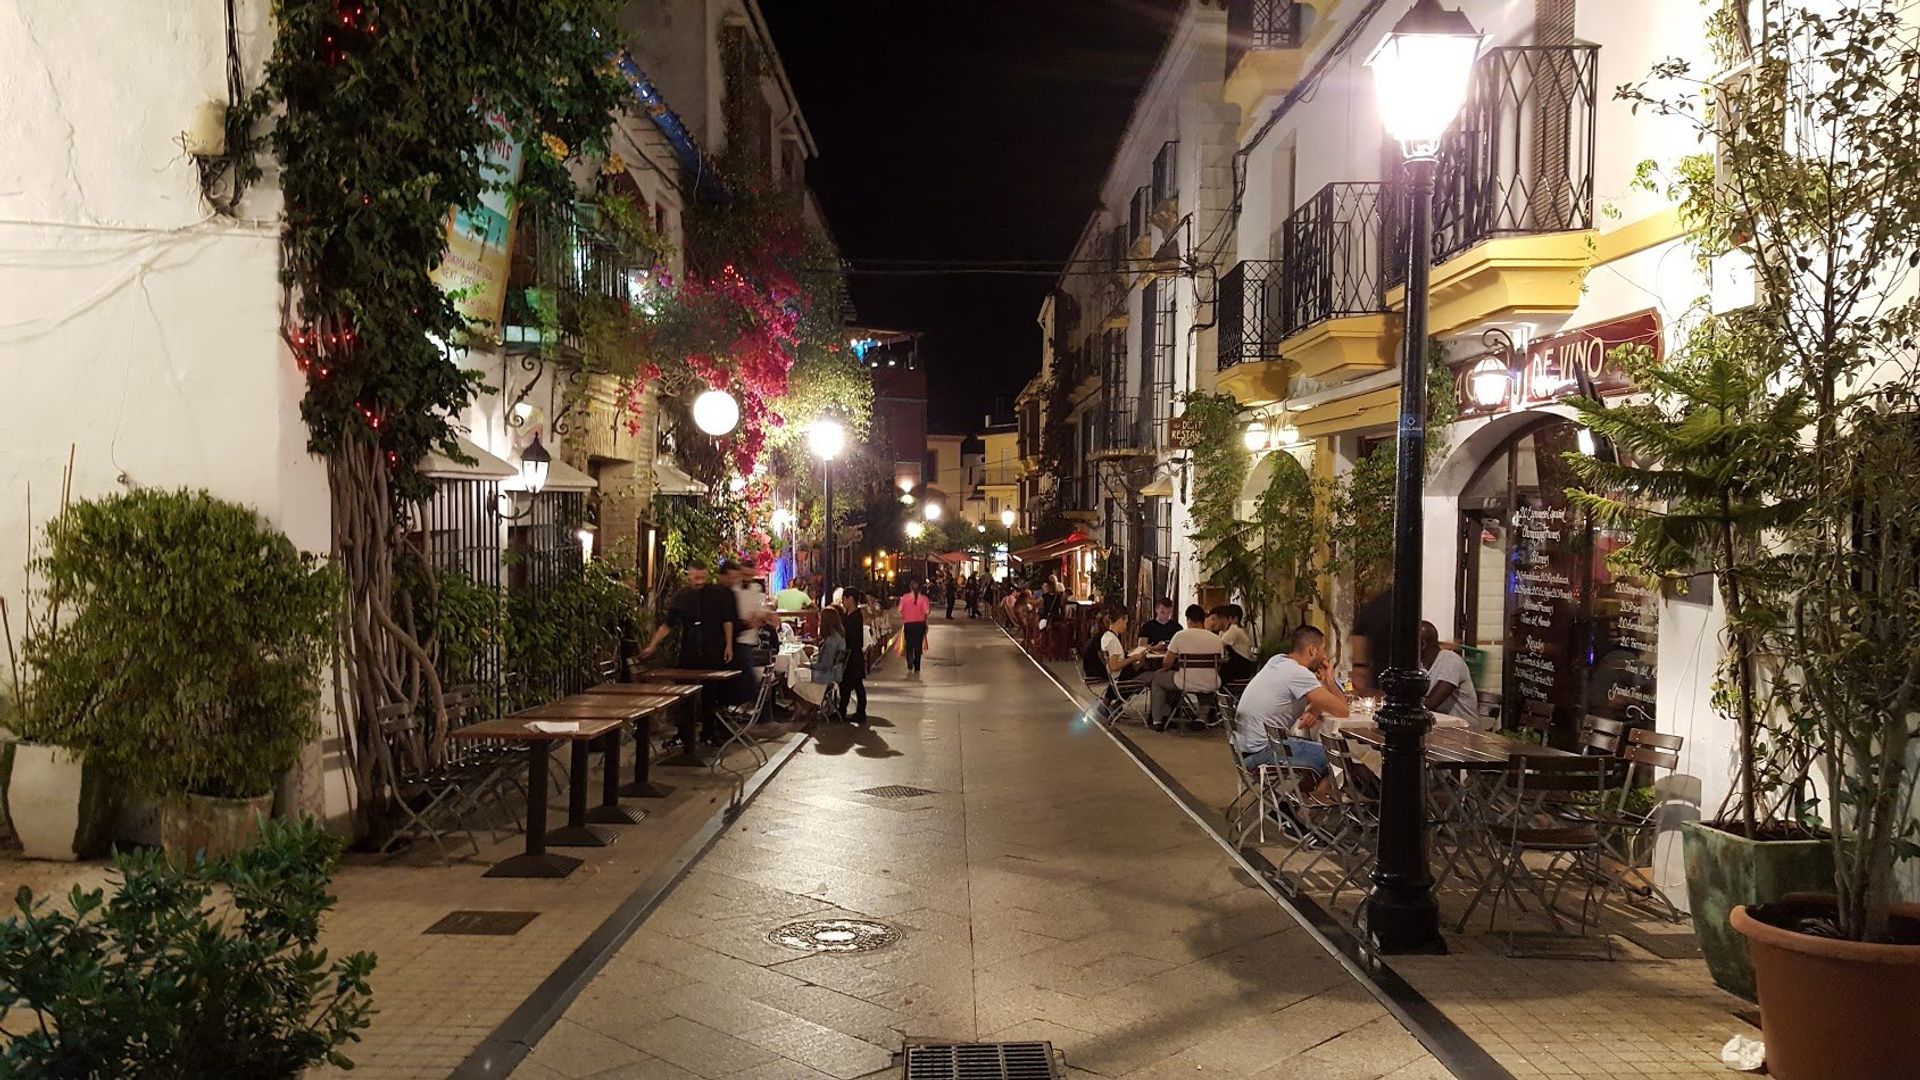 Marbella's charming labyrinth of atmospheric cobbled streets